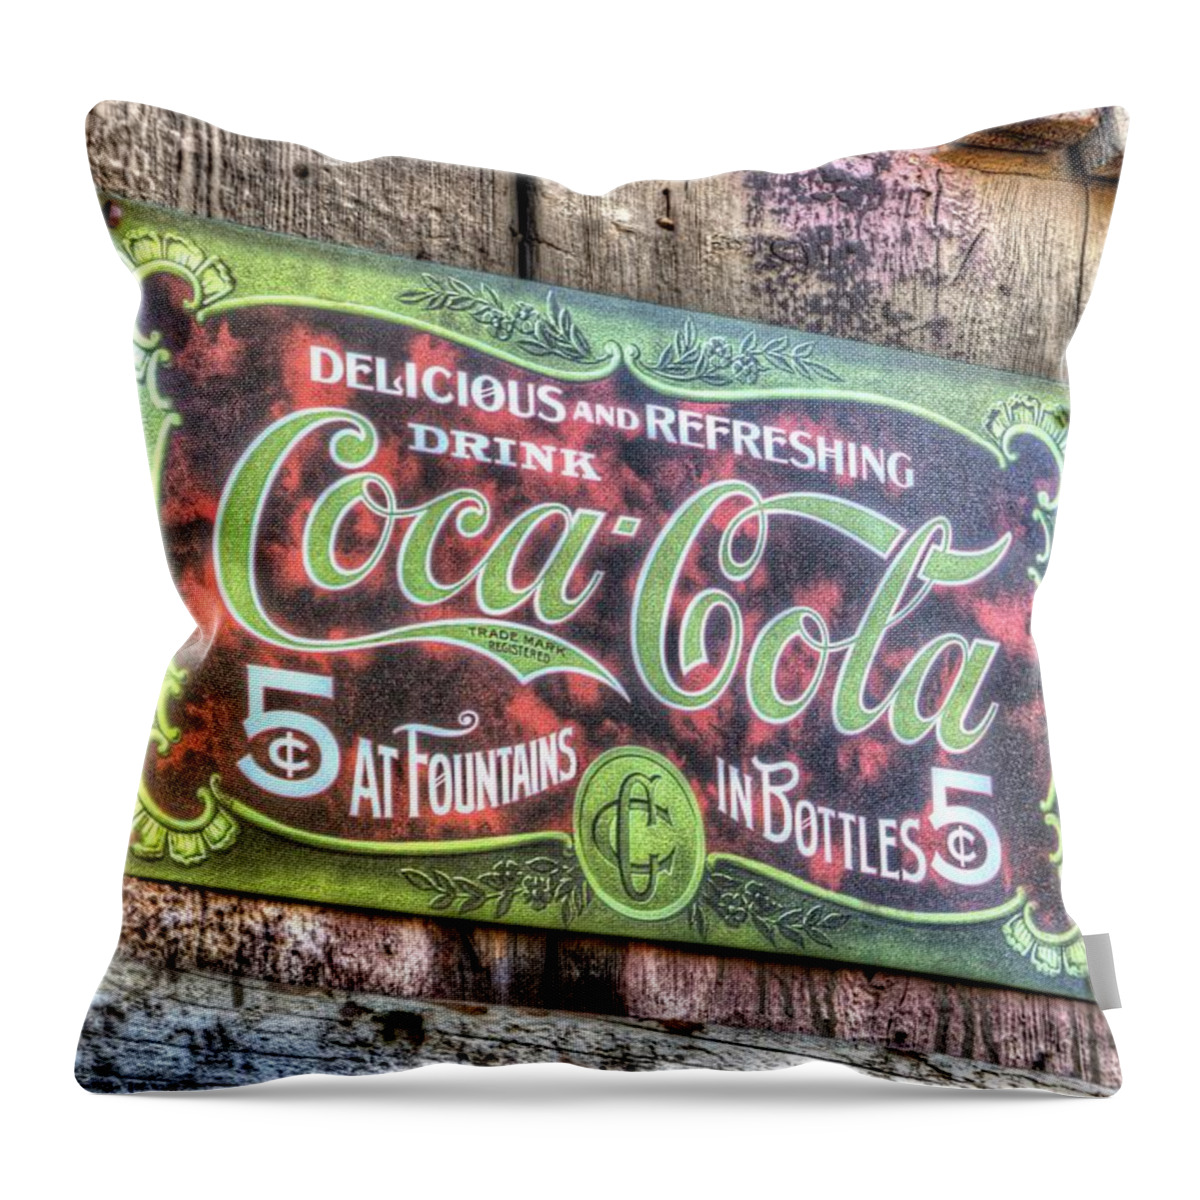 Vintage Throw Pillow featuring the photograph Delicious And Refreshing by Heidi Smith